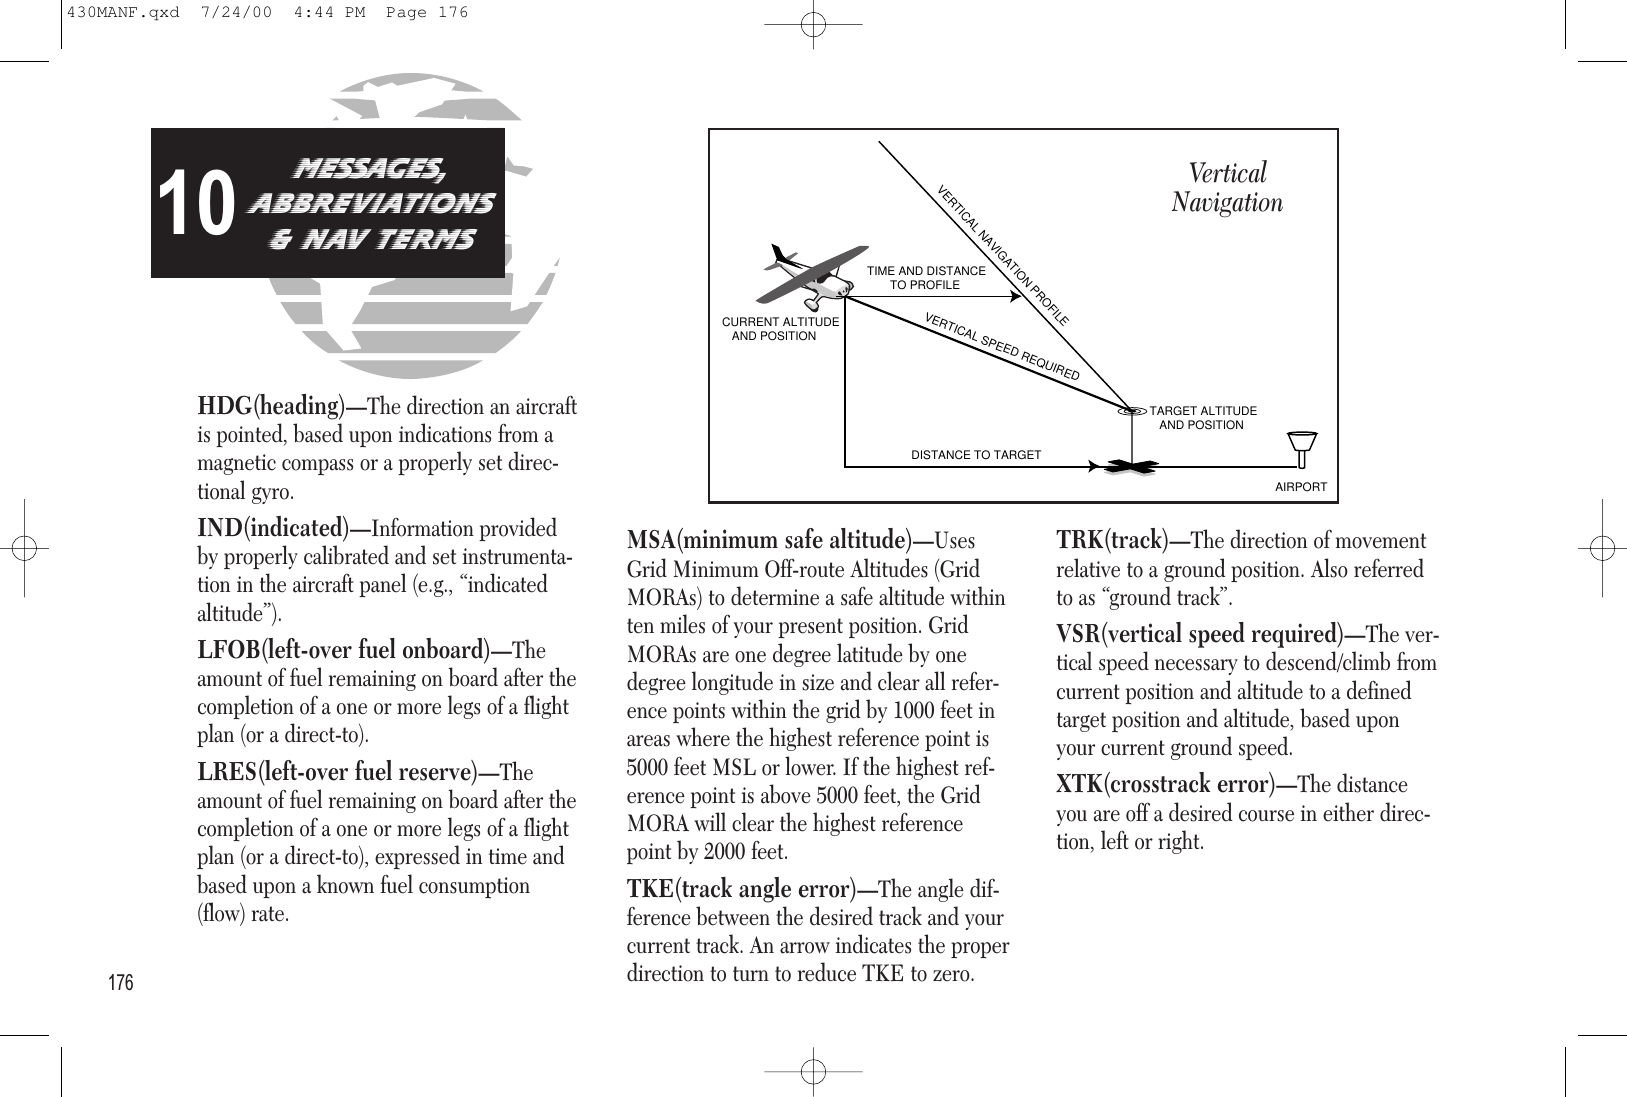 HDG(heading)—The direction an aircraftis pointed, based upon indications from amagnetic compass or a properly set direc-tional gyro.IND(indicated)—Information providedby properly calibrated and set instrumenta-tion in the aircraft panel (e.g., “indicatedaltitude”).LFOB(left-over fuel onboard)—Theamount of fuel remaining on board after thecompletion of a one or more legs of a flightplan (or a direct-to).LRES(left-over fuel reserve)—Theamount of fuel remaining on board after thecompletion of a one or more legs of a flightplan (or a direct-to), expressed in time andbased upon a known fuel consumption(flow) rate.MSA(minimum safe altitude)—UsesGrid Minimum Off-route Altitudes (GridMORAs) to determine a safe altitude withinten miles of your present position. GridMORAs are one degree latitude by onedegree longitude in size and clear all refer-ence points within the grid by 1000 feet inareas where the highest reference point is5000 feet MSL or lower. If the highest ref-erence point is above 5000 feet, the GridMORA will clear the highest referencepoint by 2000 feet.TKE(track angle error)—The angle dif-ference between the desired track and yourcurrent track. An arrow indicates the properdirection to turn to reduce TKE to zero.TRK(track)—The direction of movementrelative to a ground position. Also referredto as “ground track”.VSR(vertical speed required)—The ver-tical speed necessary to descend/climb fromcurrent position and altitude to a definedtarget position and altitude, based uponyour current ground speed.XTK(crosstrack error)—The distanceyou are off a desired course in either direc-tion, left or right.176MESSAGES,aBBREVIATIONS&amp; nav tERMS10VERTICAL NAVIGATION PROFILEVERTICAL SPEED REQUIREDDISTANCE TO TARGETTIME AND DISTANCE        TO PROFILETARGET ALTITUDE   AND POSITIONAIRPORTCURRENT ALTITUDE   AND POSITIONVertical Navigation430MANF.qxd  7/24/00  4:44 PM  Page 176